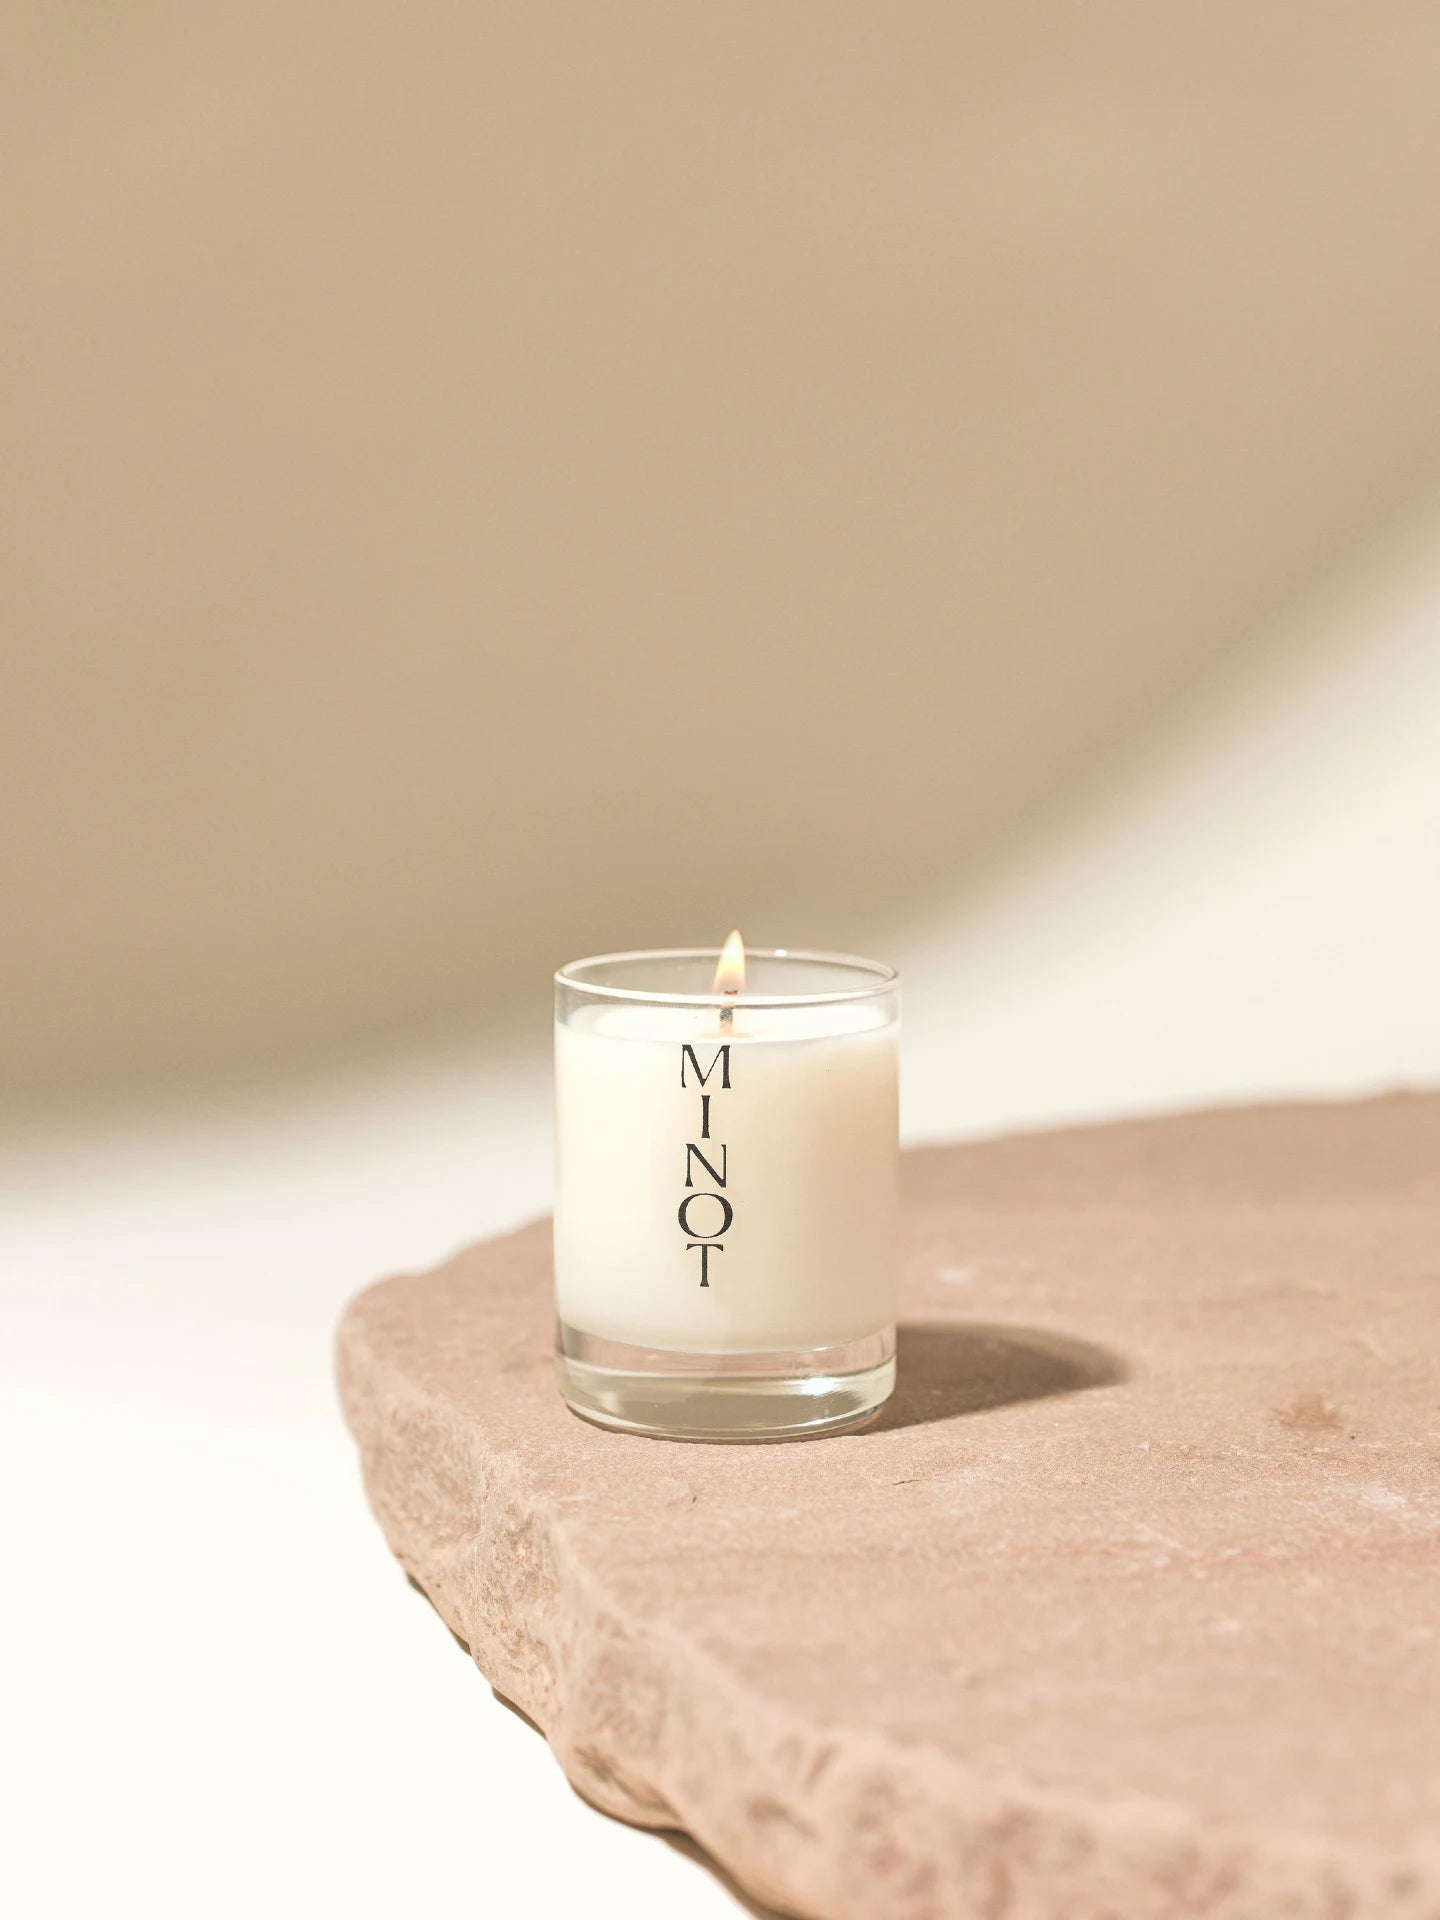 Mini Atmosphere is a non-toxic travel candle votive with scents of coconut, sandalwood and almond